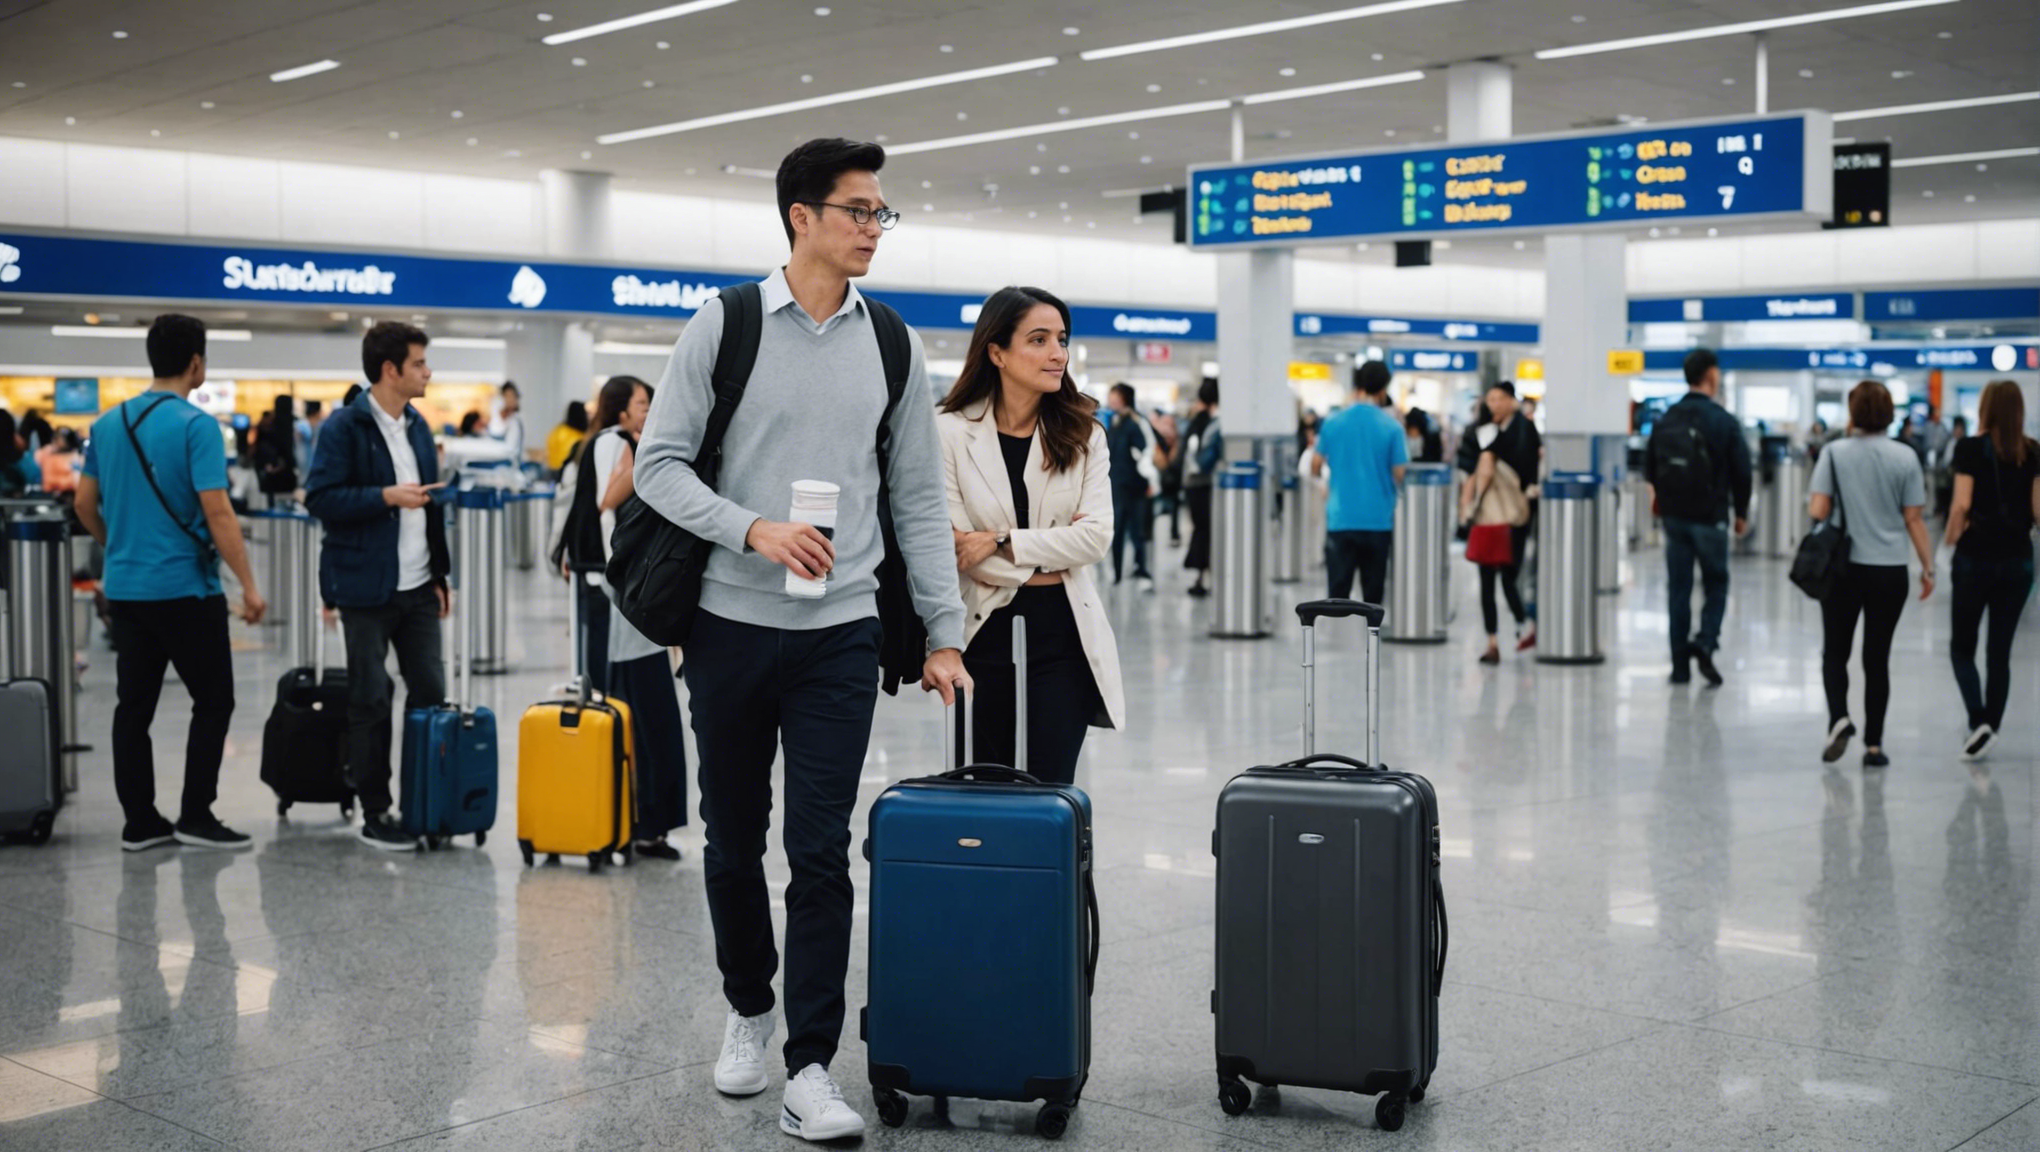 find out how sita recorded a significant drop in the number of misdirected baggage items in air transport in 2023.